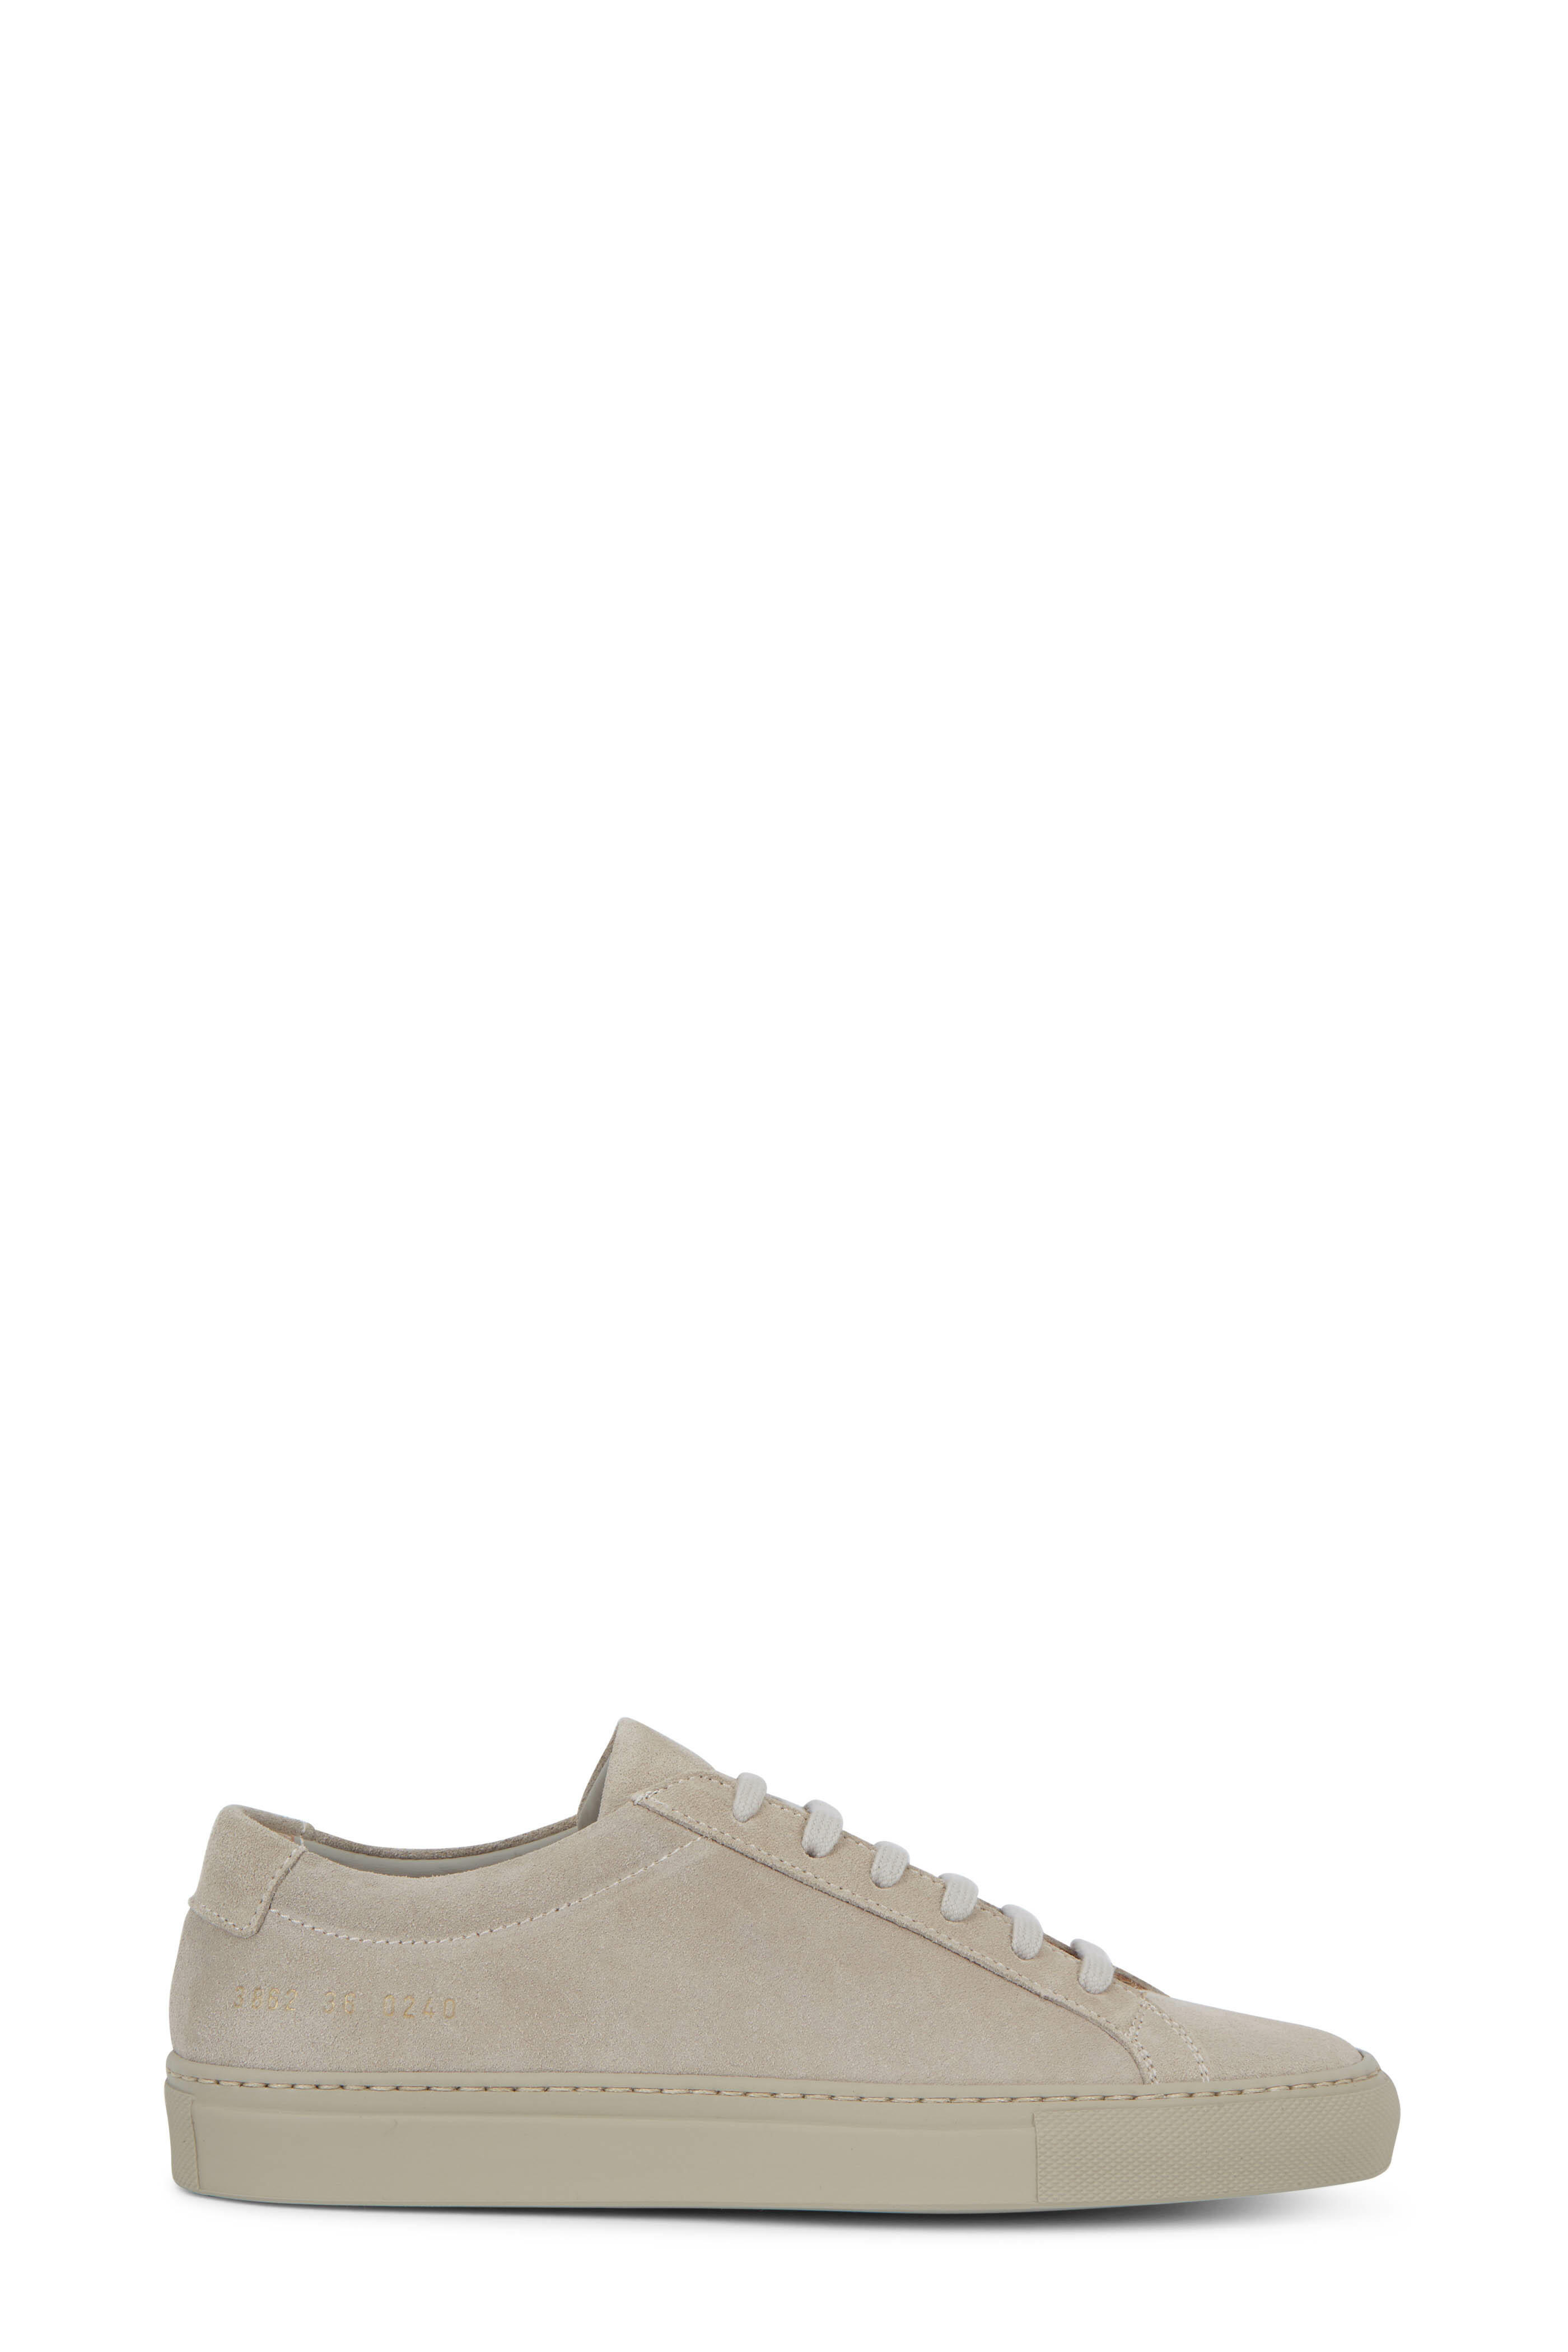 Woman by Common Projects - Women's Original Achilles Taupe Low Top Sneaker